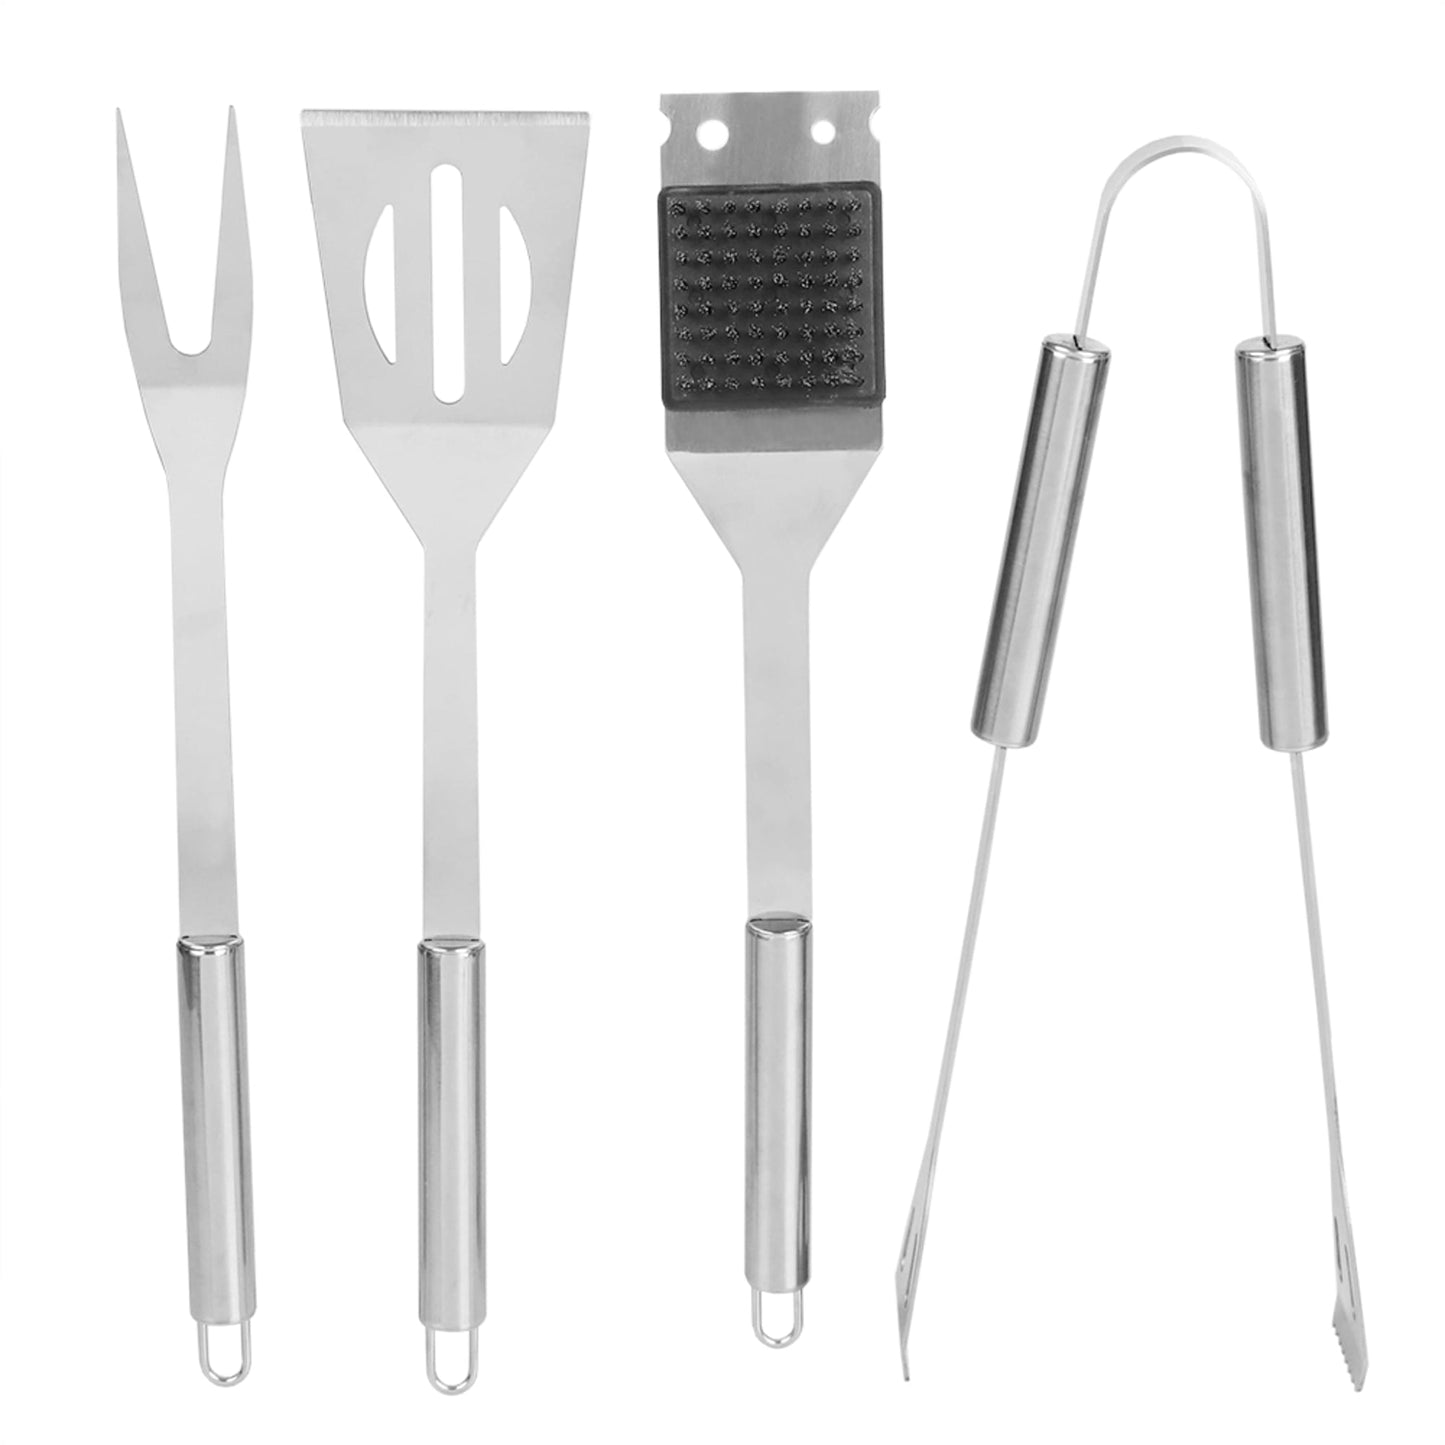 4 Piece Stainless Steel BBQ Tool Set